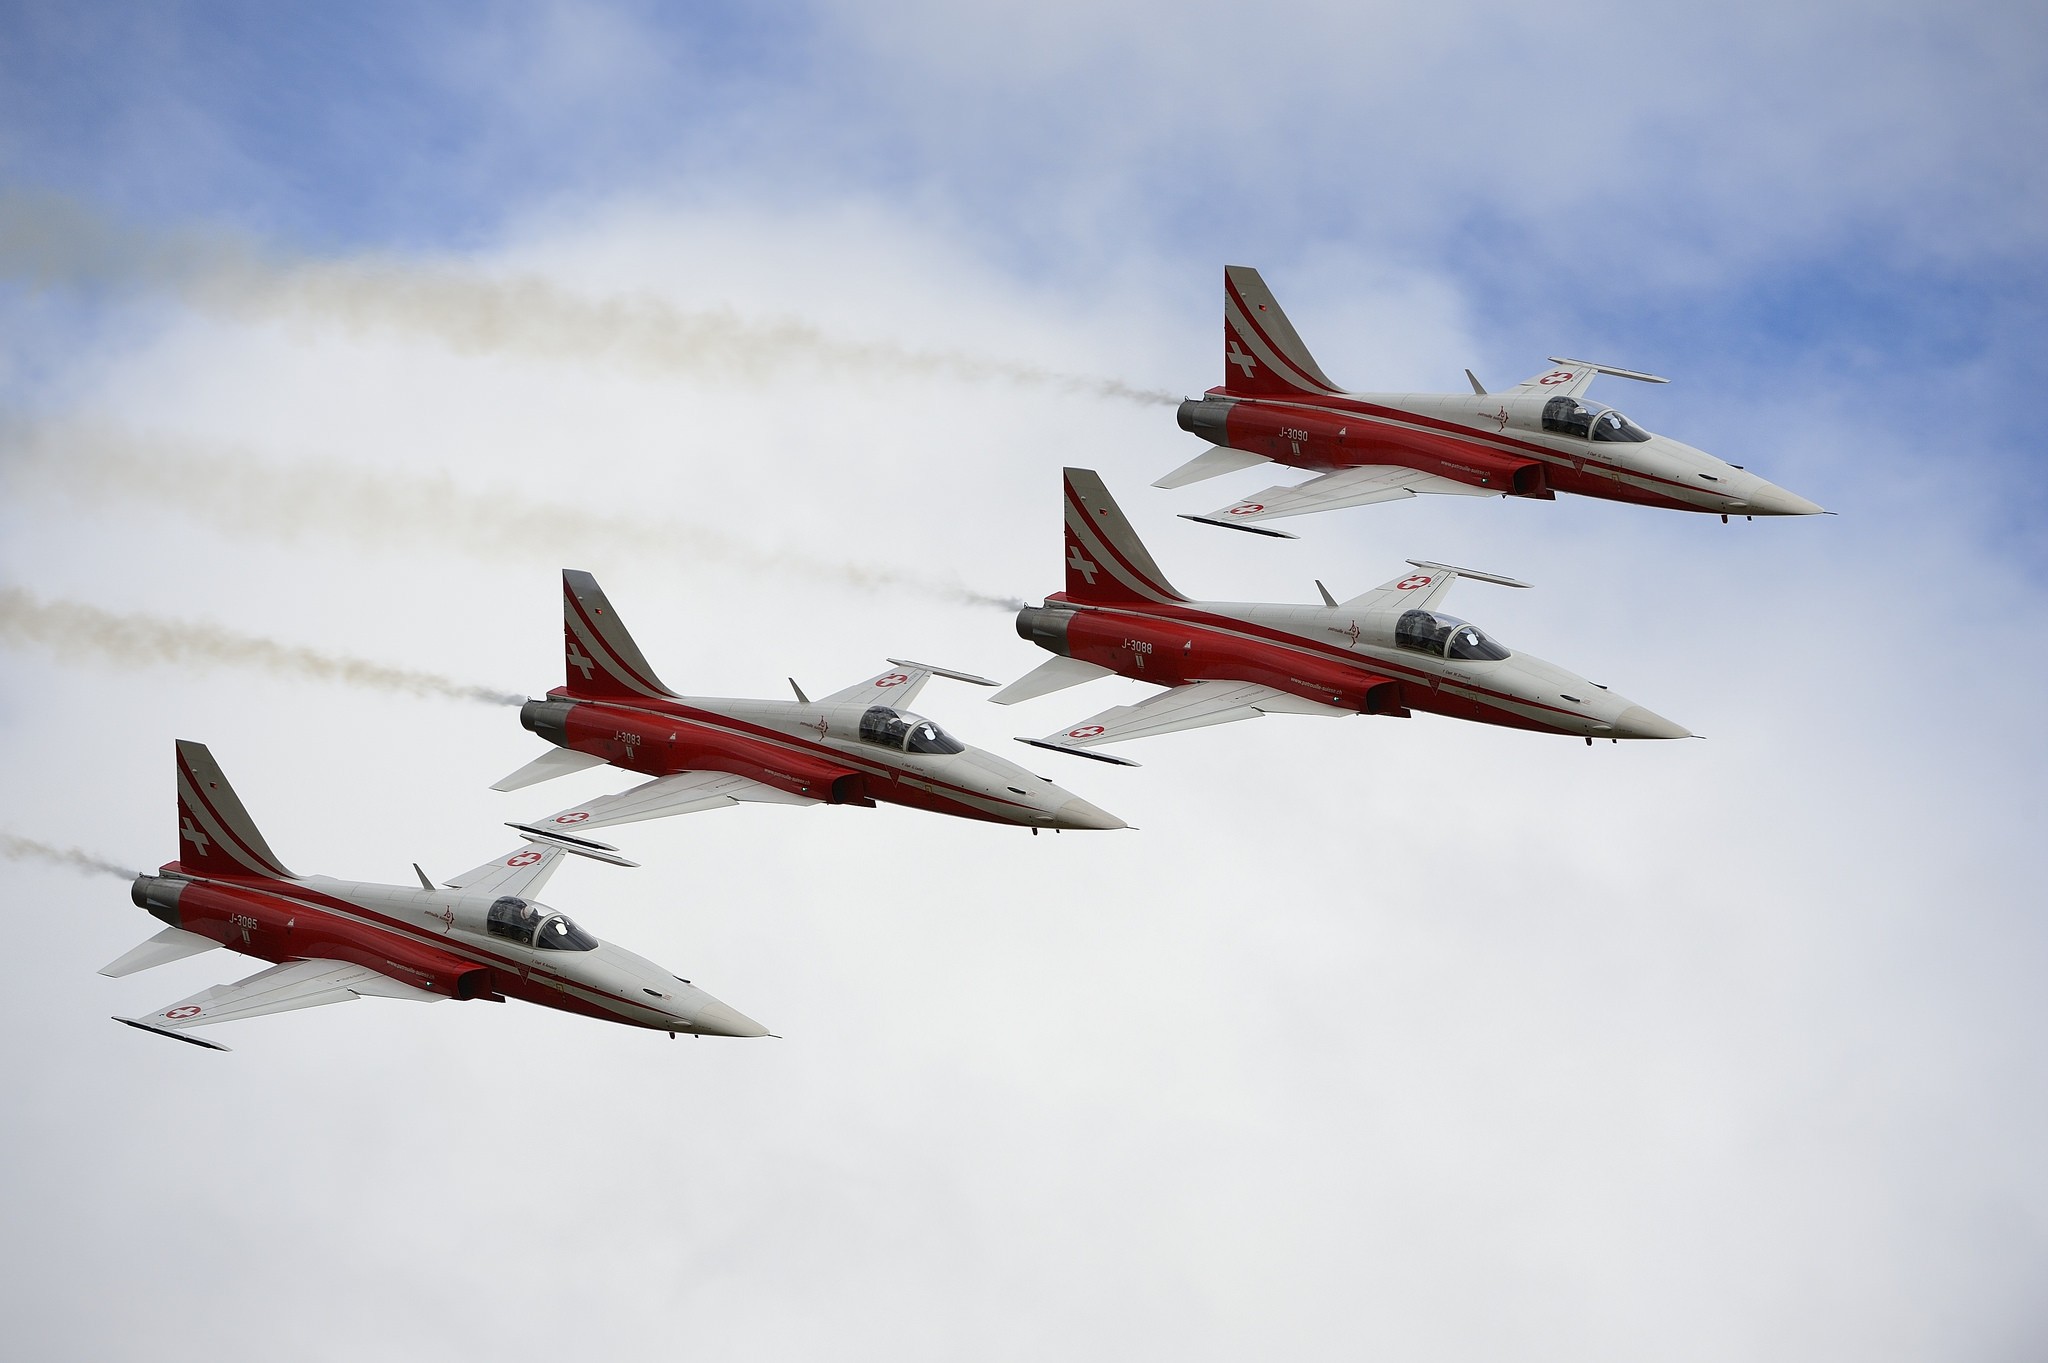 General 2048x1363 F-5E aircraft contrails military aircraft military vehicle military vehicle sky Northrop F-5 Tiger II Formation Switzerland Swiss Air Force Patrouille Suisse aerobatic team air force jet fighter